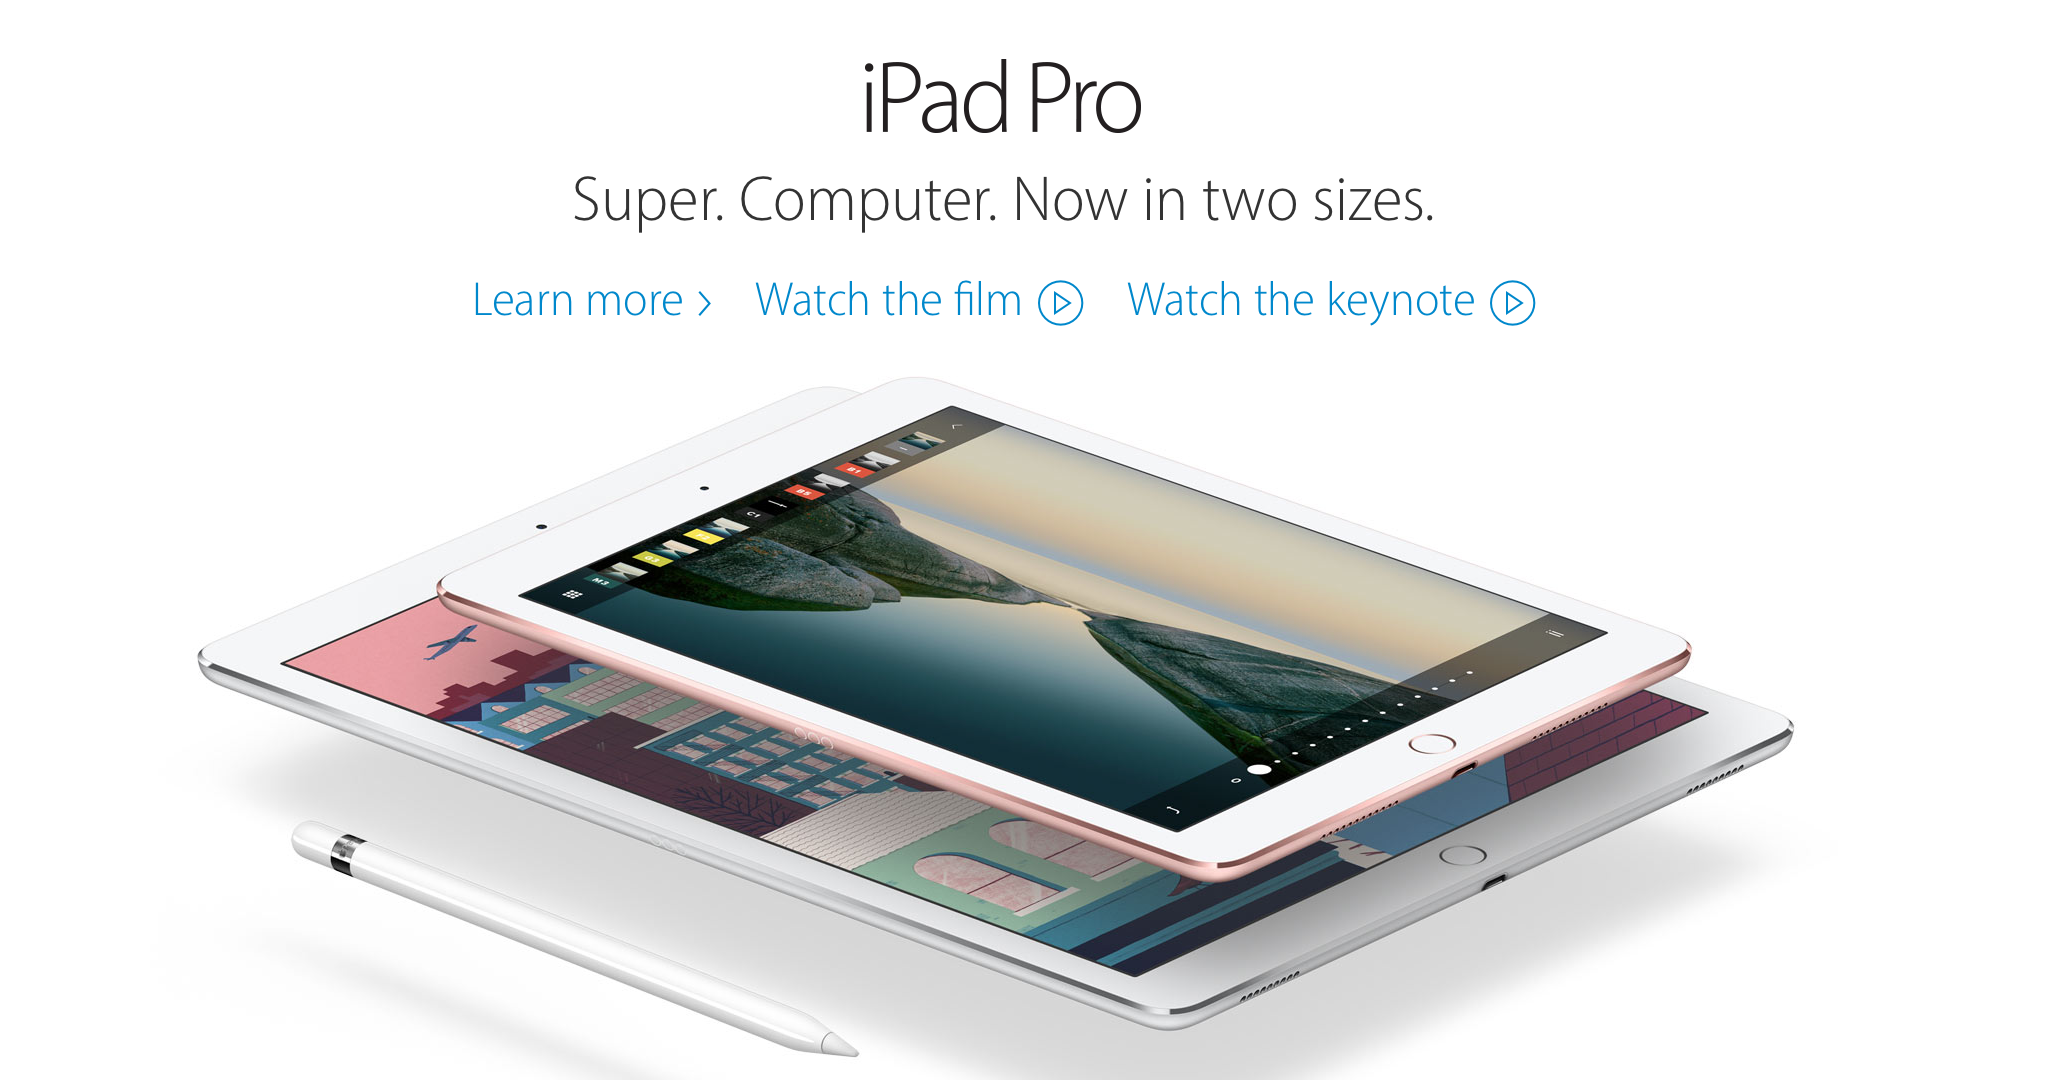 iPad Pro 9.7-inch smaller than old model